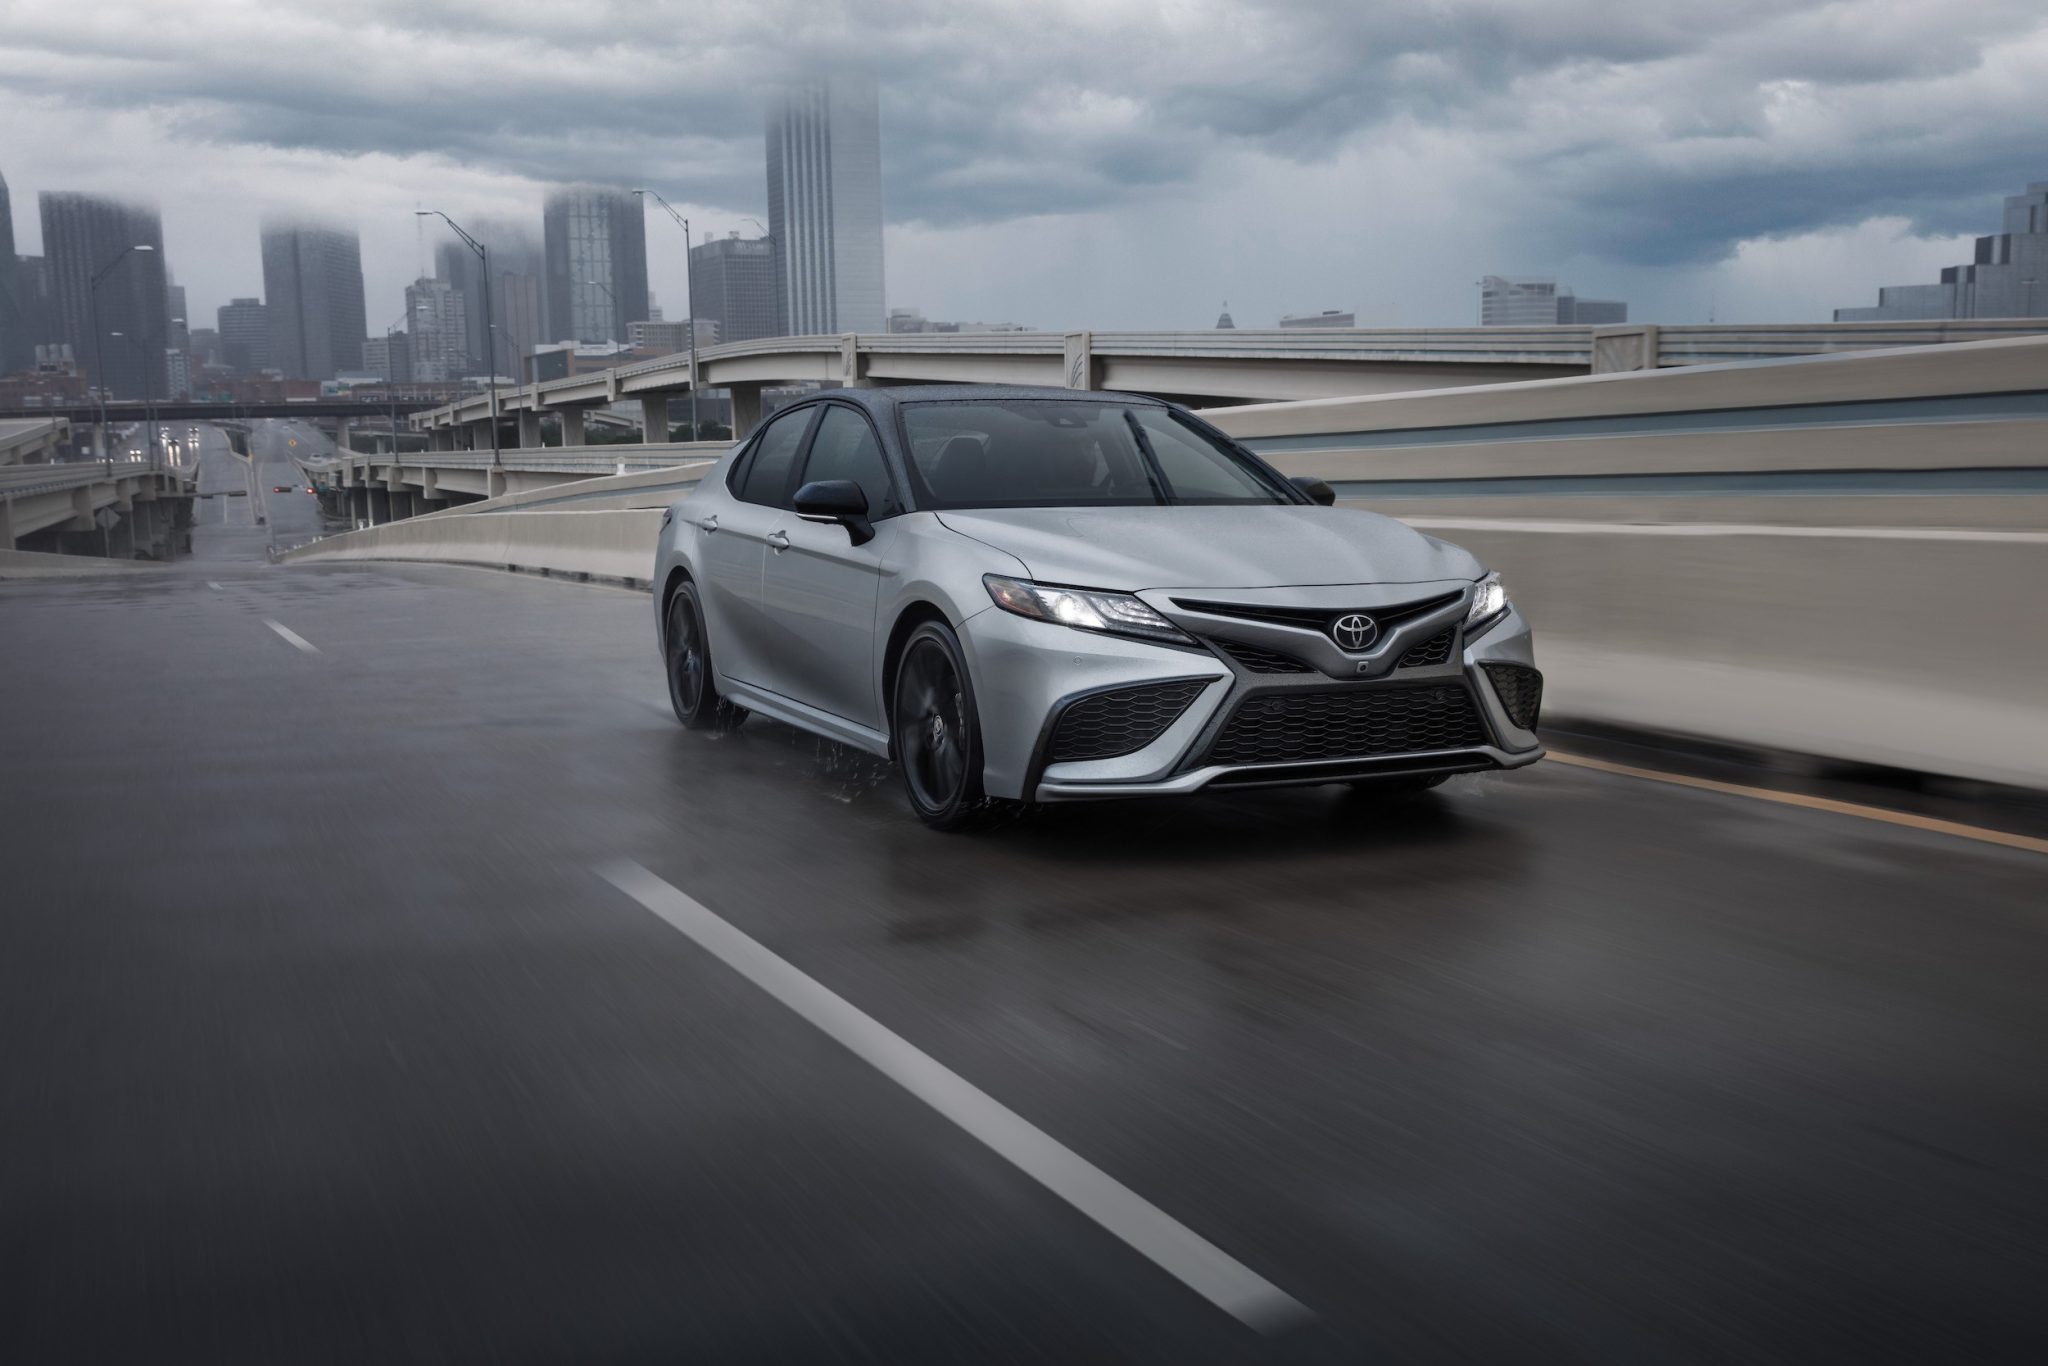 Toyota Camry Recall Seatbelt Issue Addressed for 20232024 Models